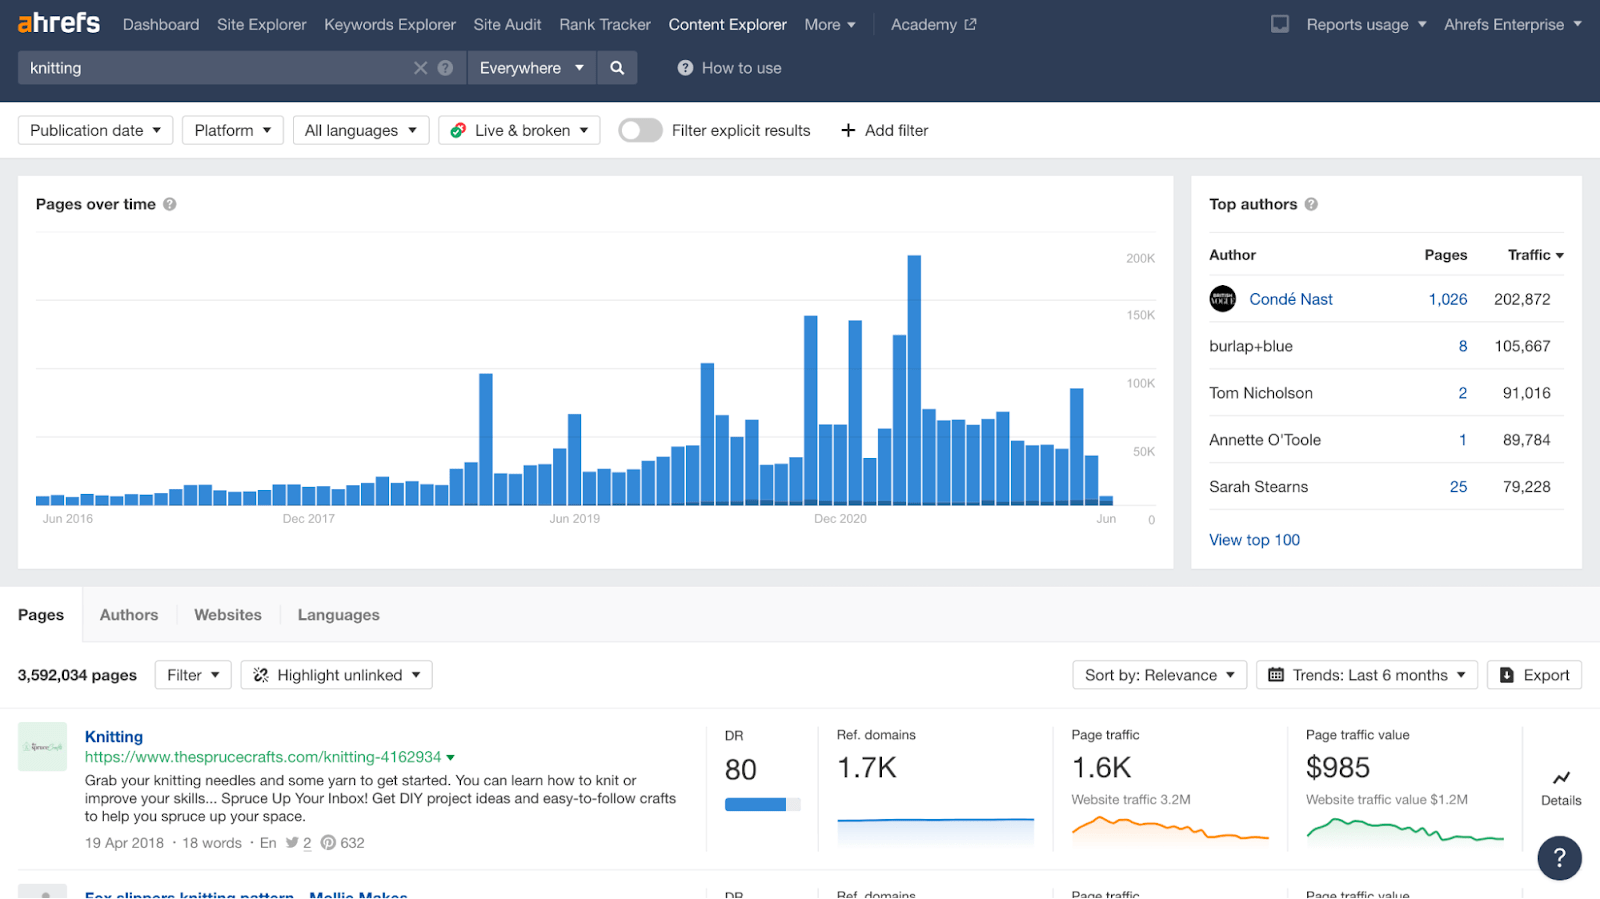 Ahrefs' Content Explorer search results for term "knitting"